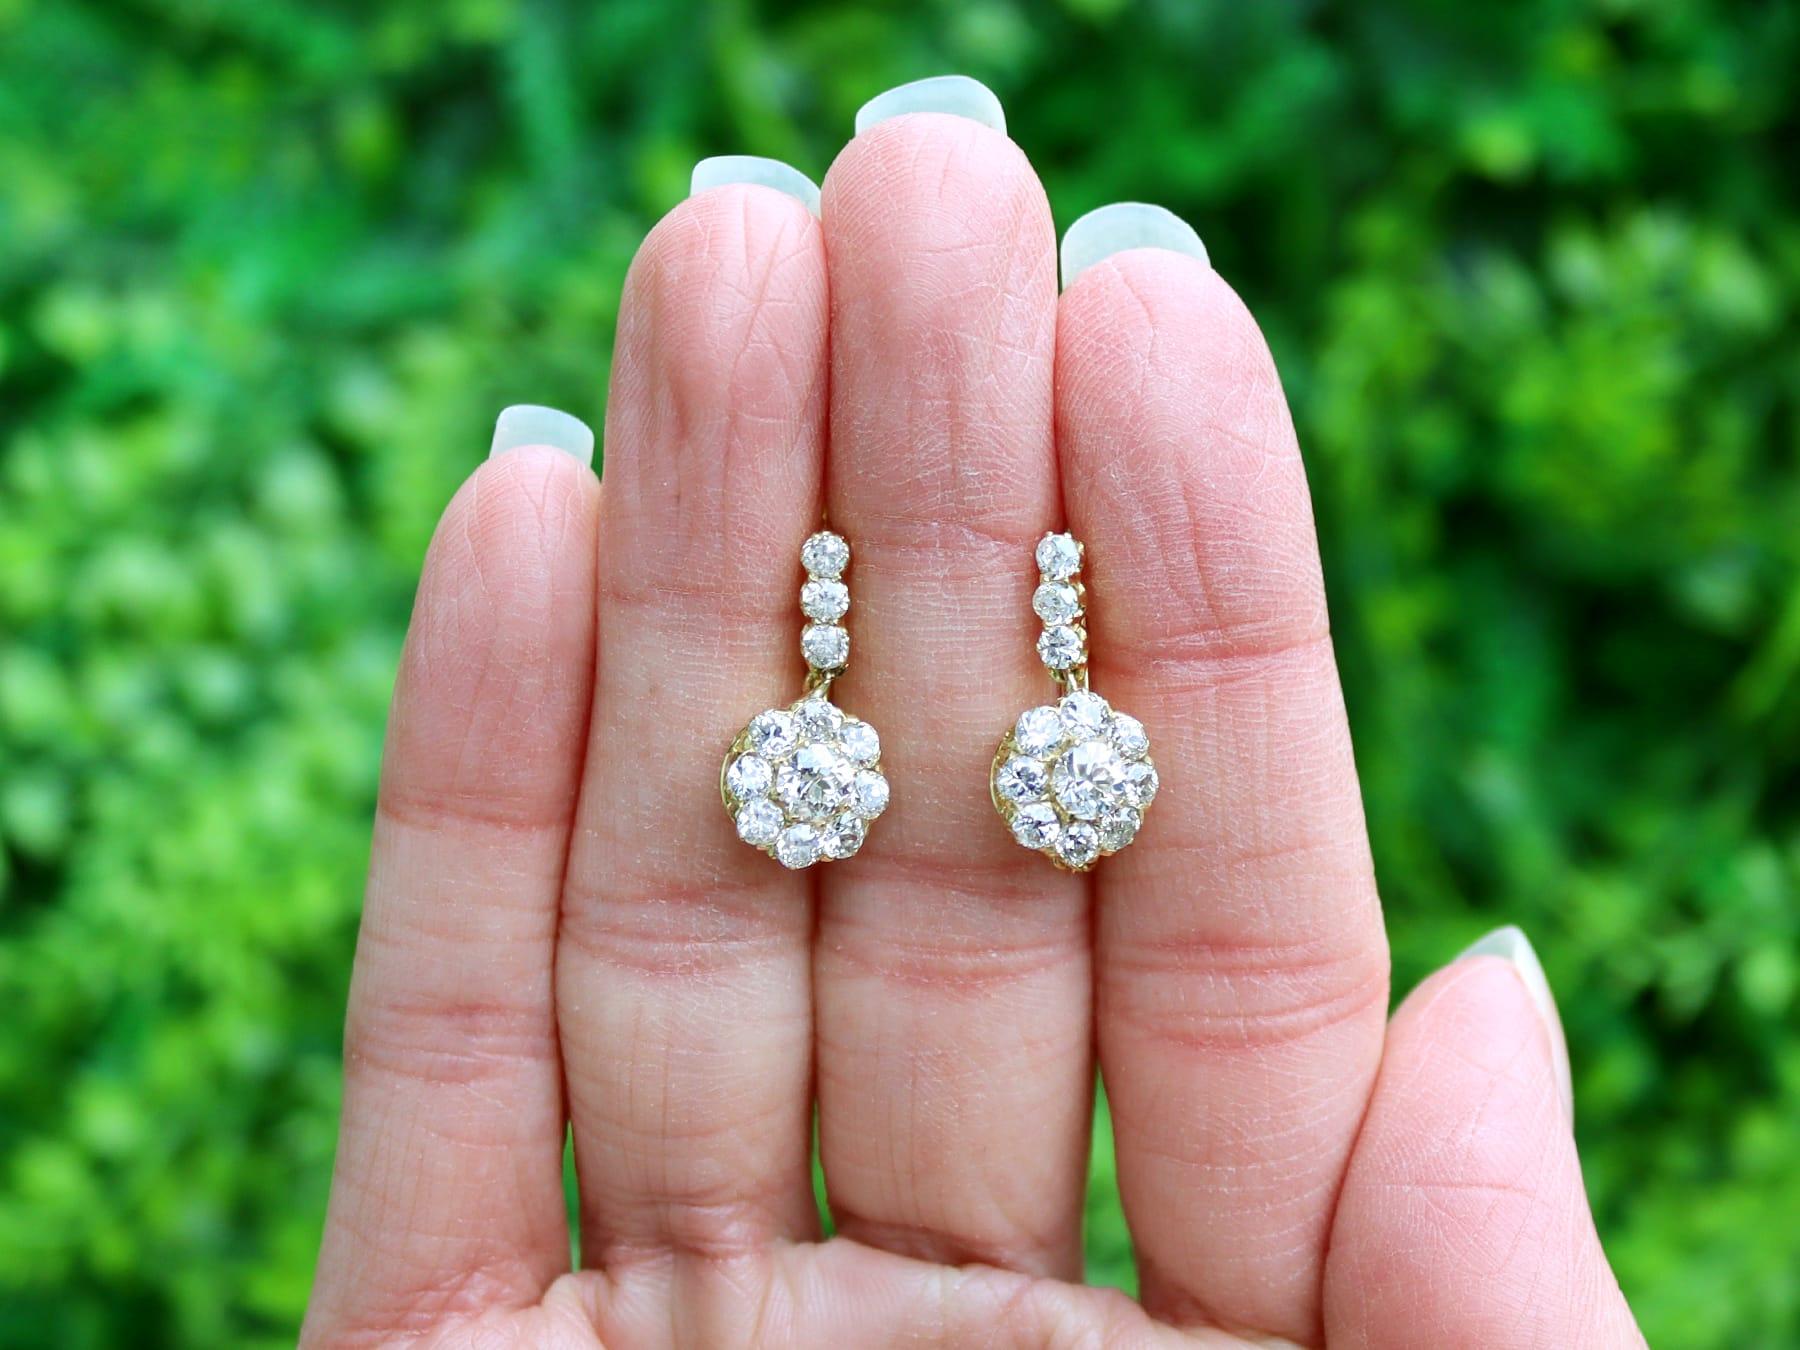 A stunning, fine and impressive pair of antique Dutch 2.35 carat diamond, 14 karat yellow gold and silver set cluster earrings; part of our diverse floral jewellery collections.

These stunning, fine and impressive antique diamond earrings have been